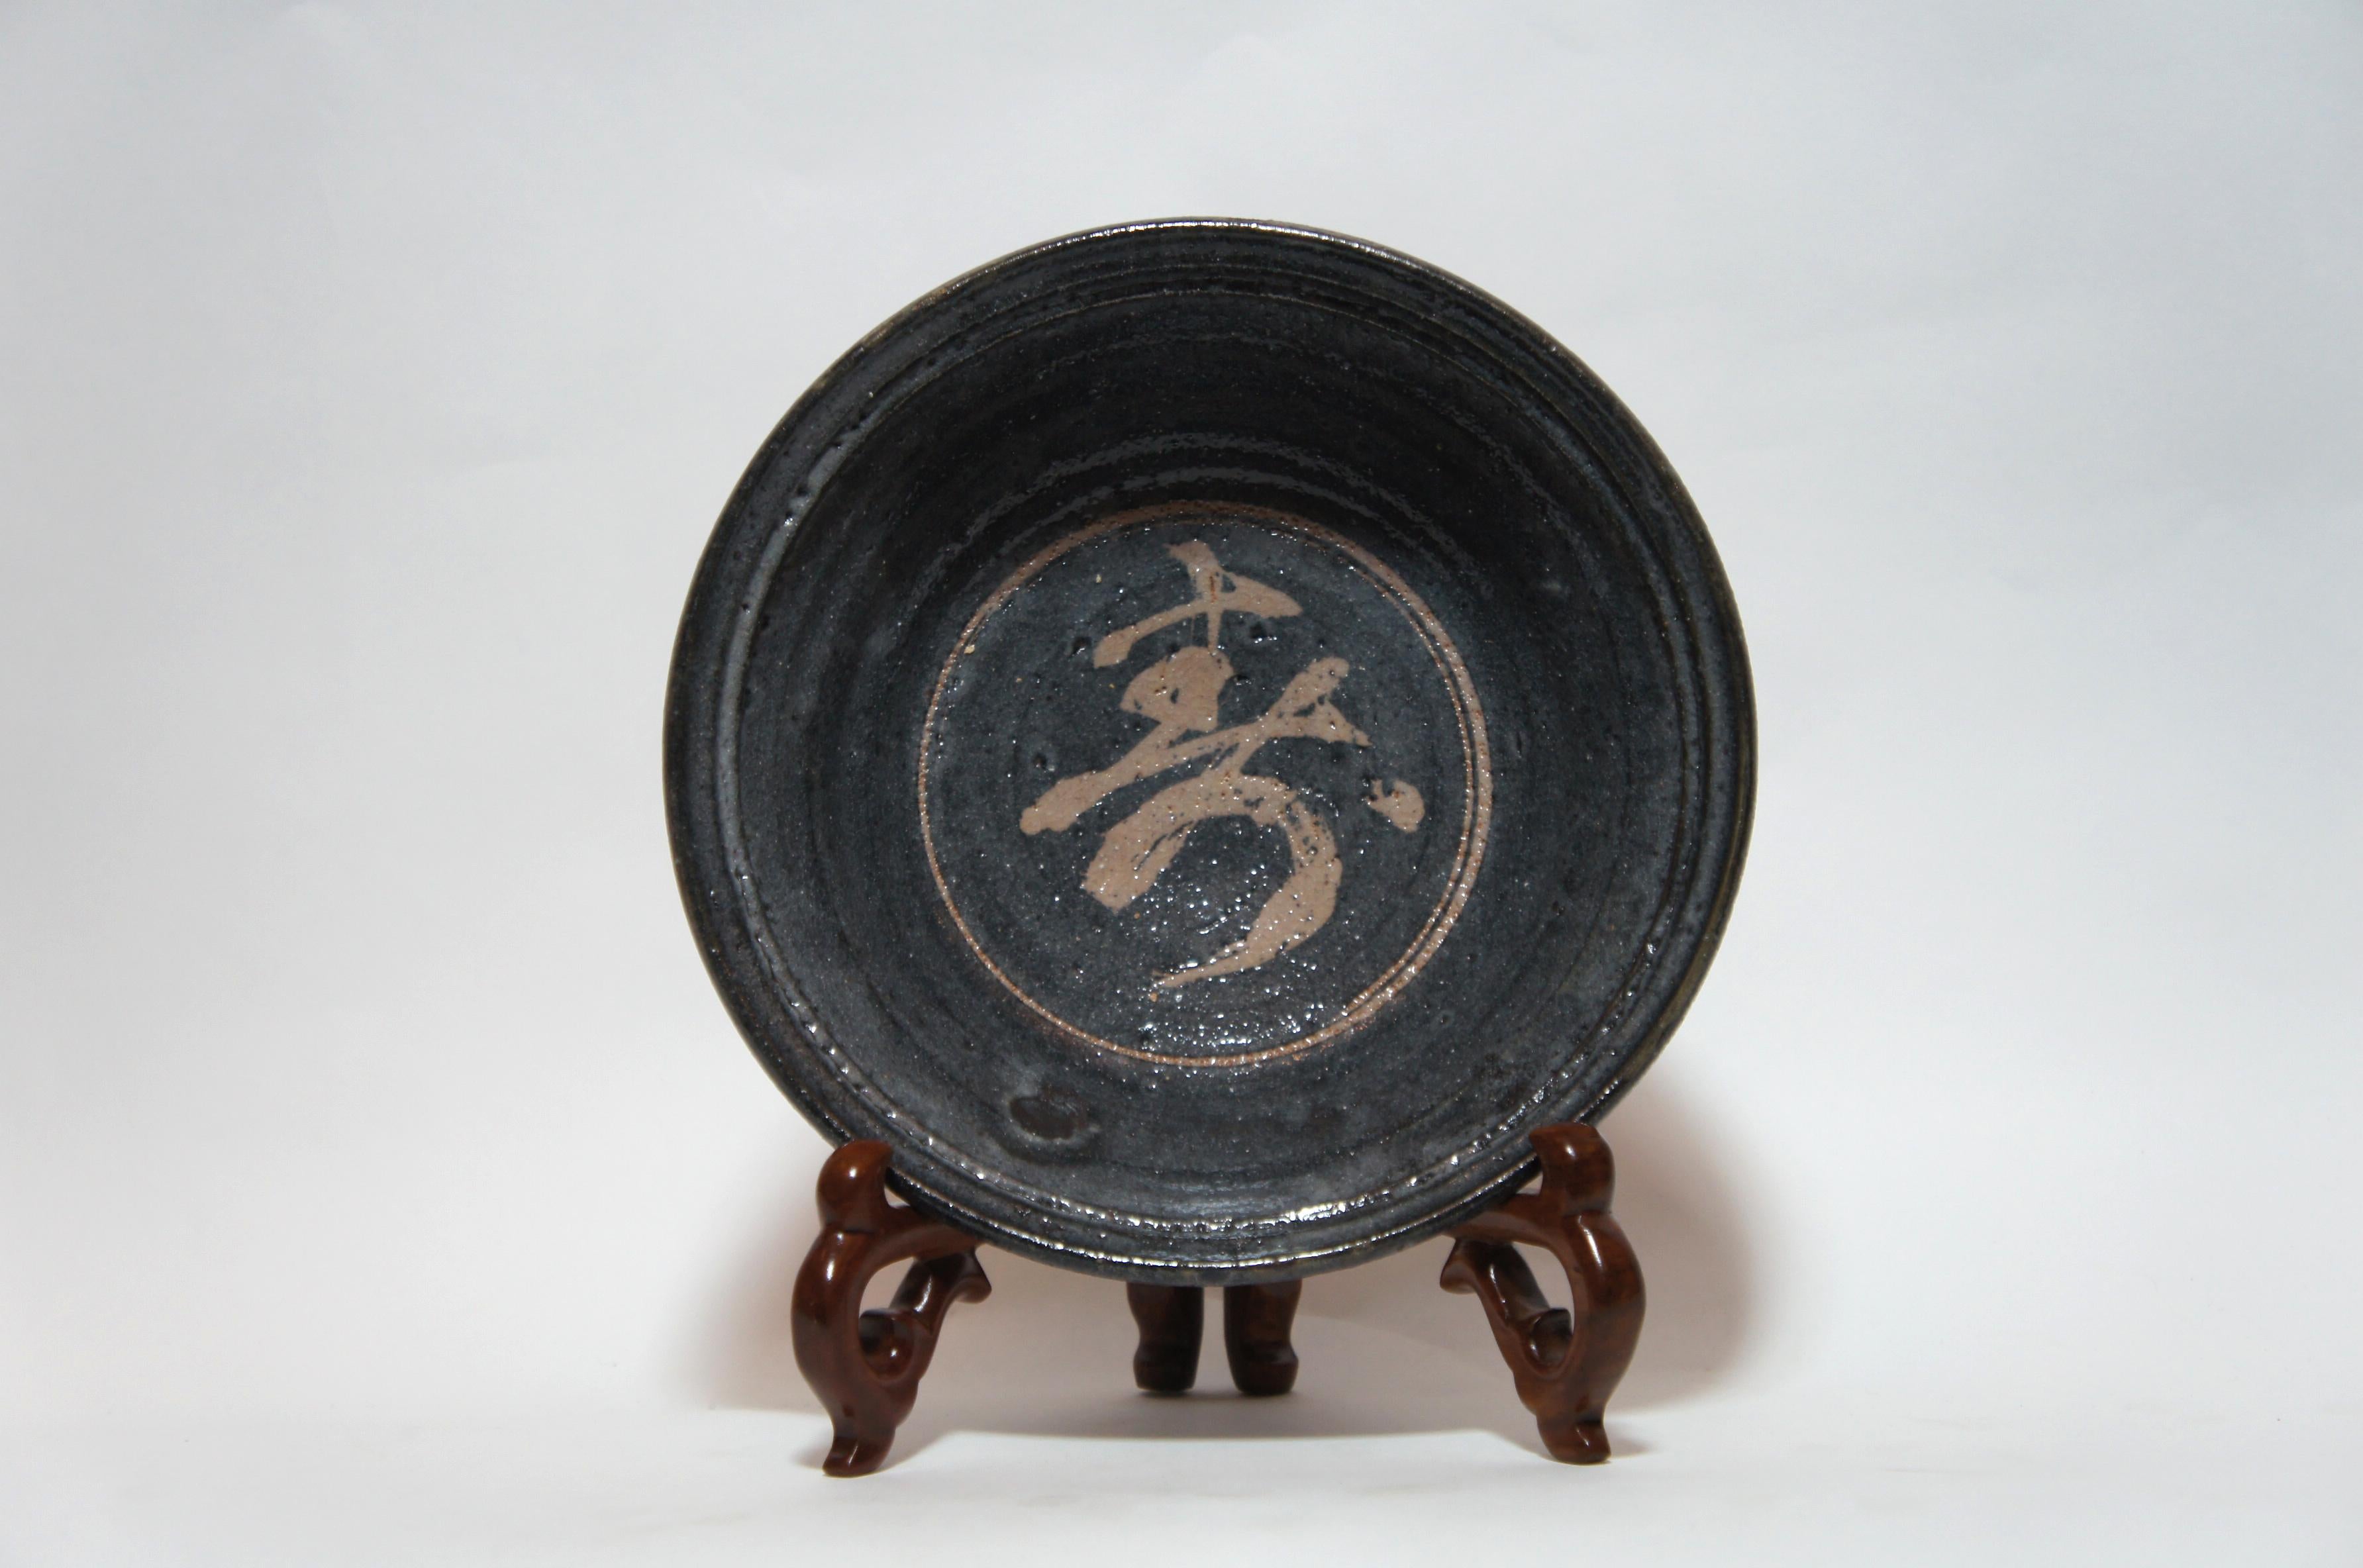 Beautiful Kisyu Ware Ceramic bowl.
In the bottom of the bowl, there is a signature of Aoi kiln.

Kisyu Ware is a Japanese famous ware in Wakayama prefecture, and Aoi kiln is one of the kiln of Kisyu Ware in Nanki Shirahama where is a town on the